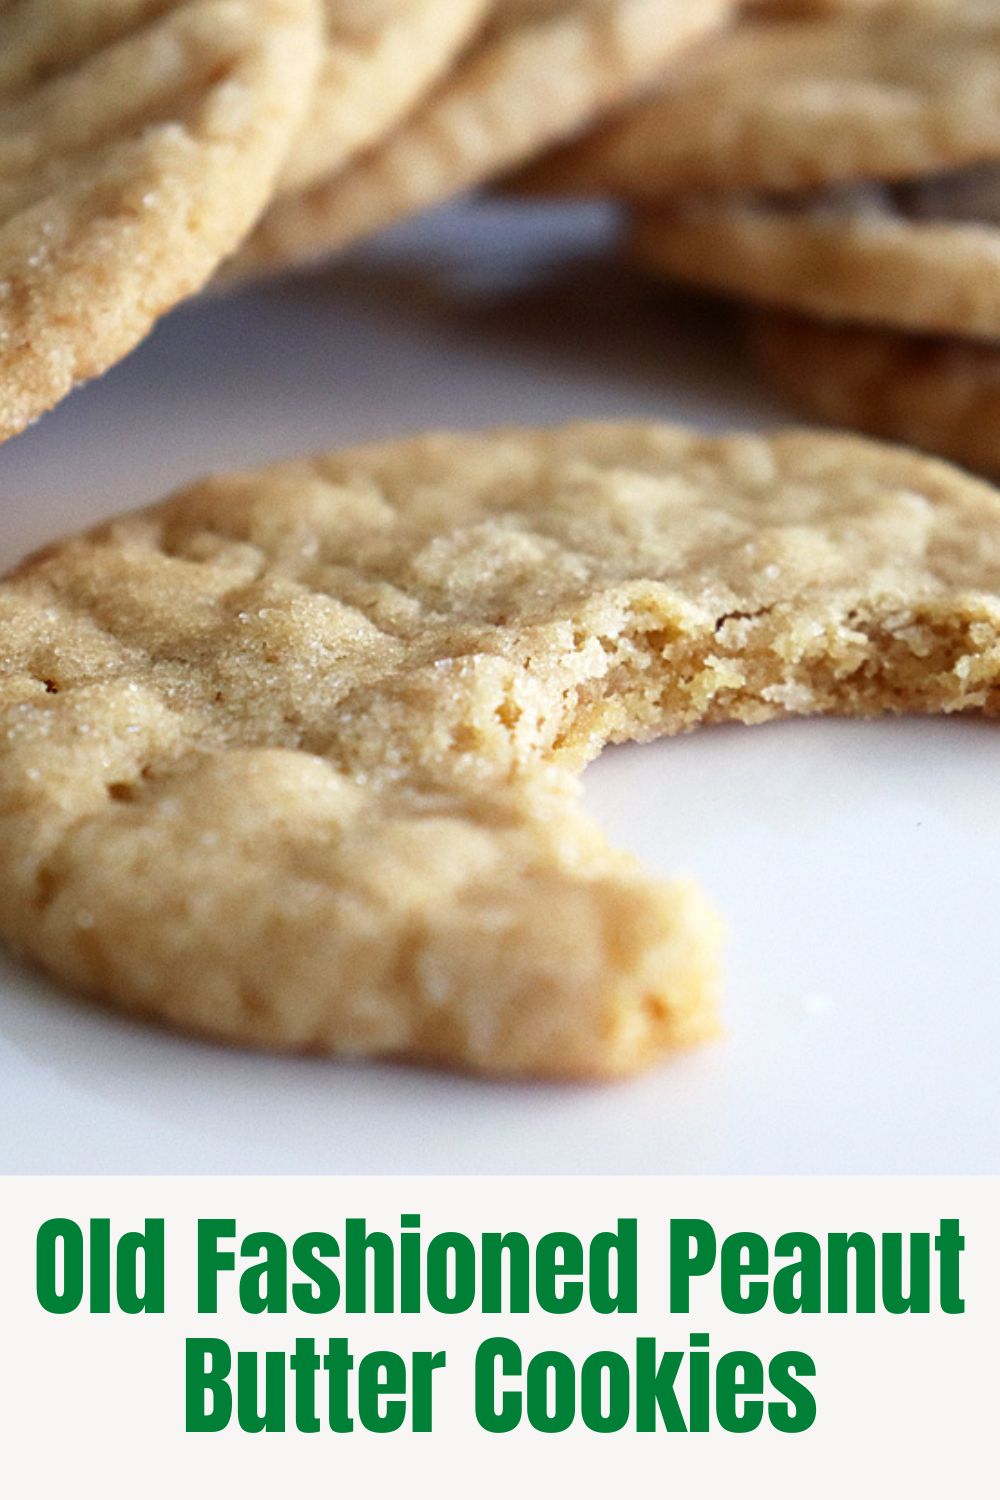 PIn for Classic Peanut Butter Cookie Recipe